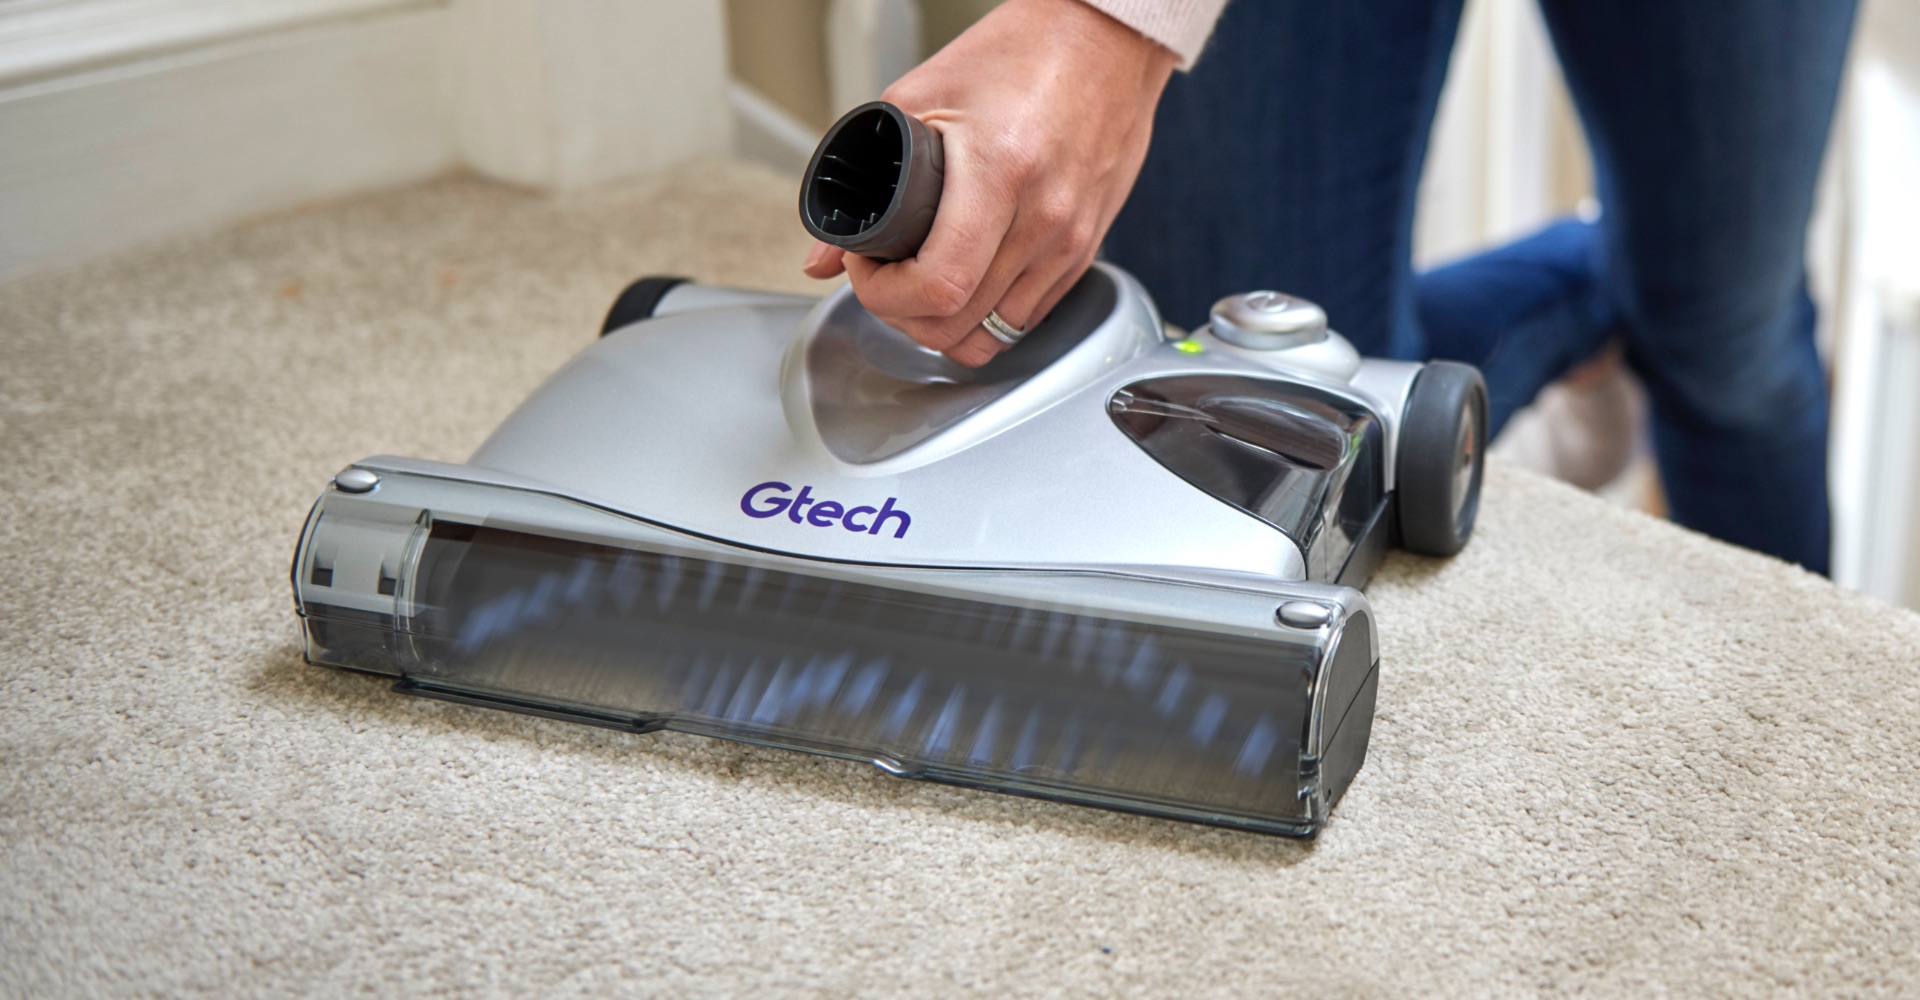 SW02 advanced battery powered carpet sweeper